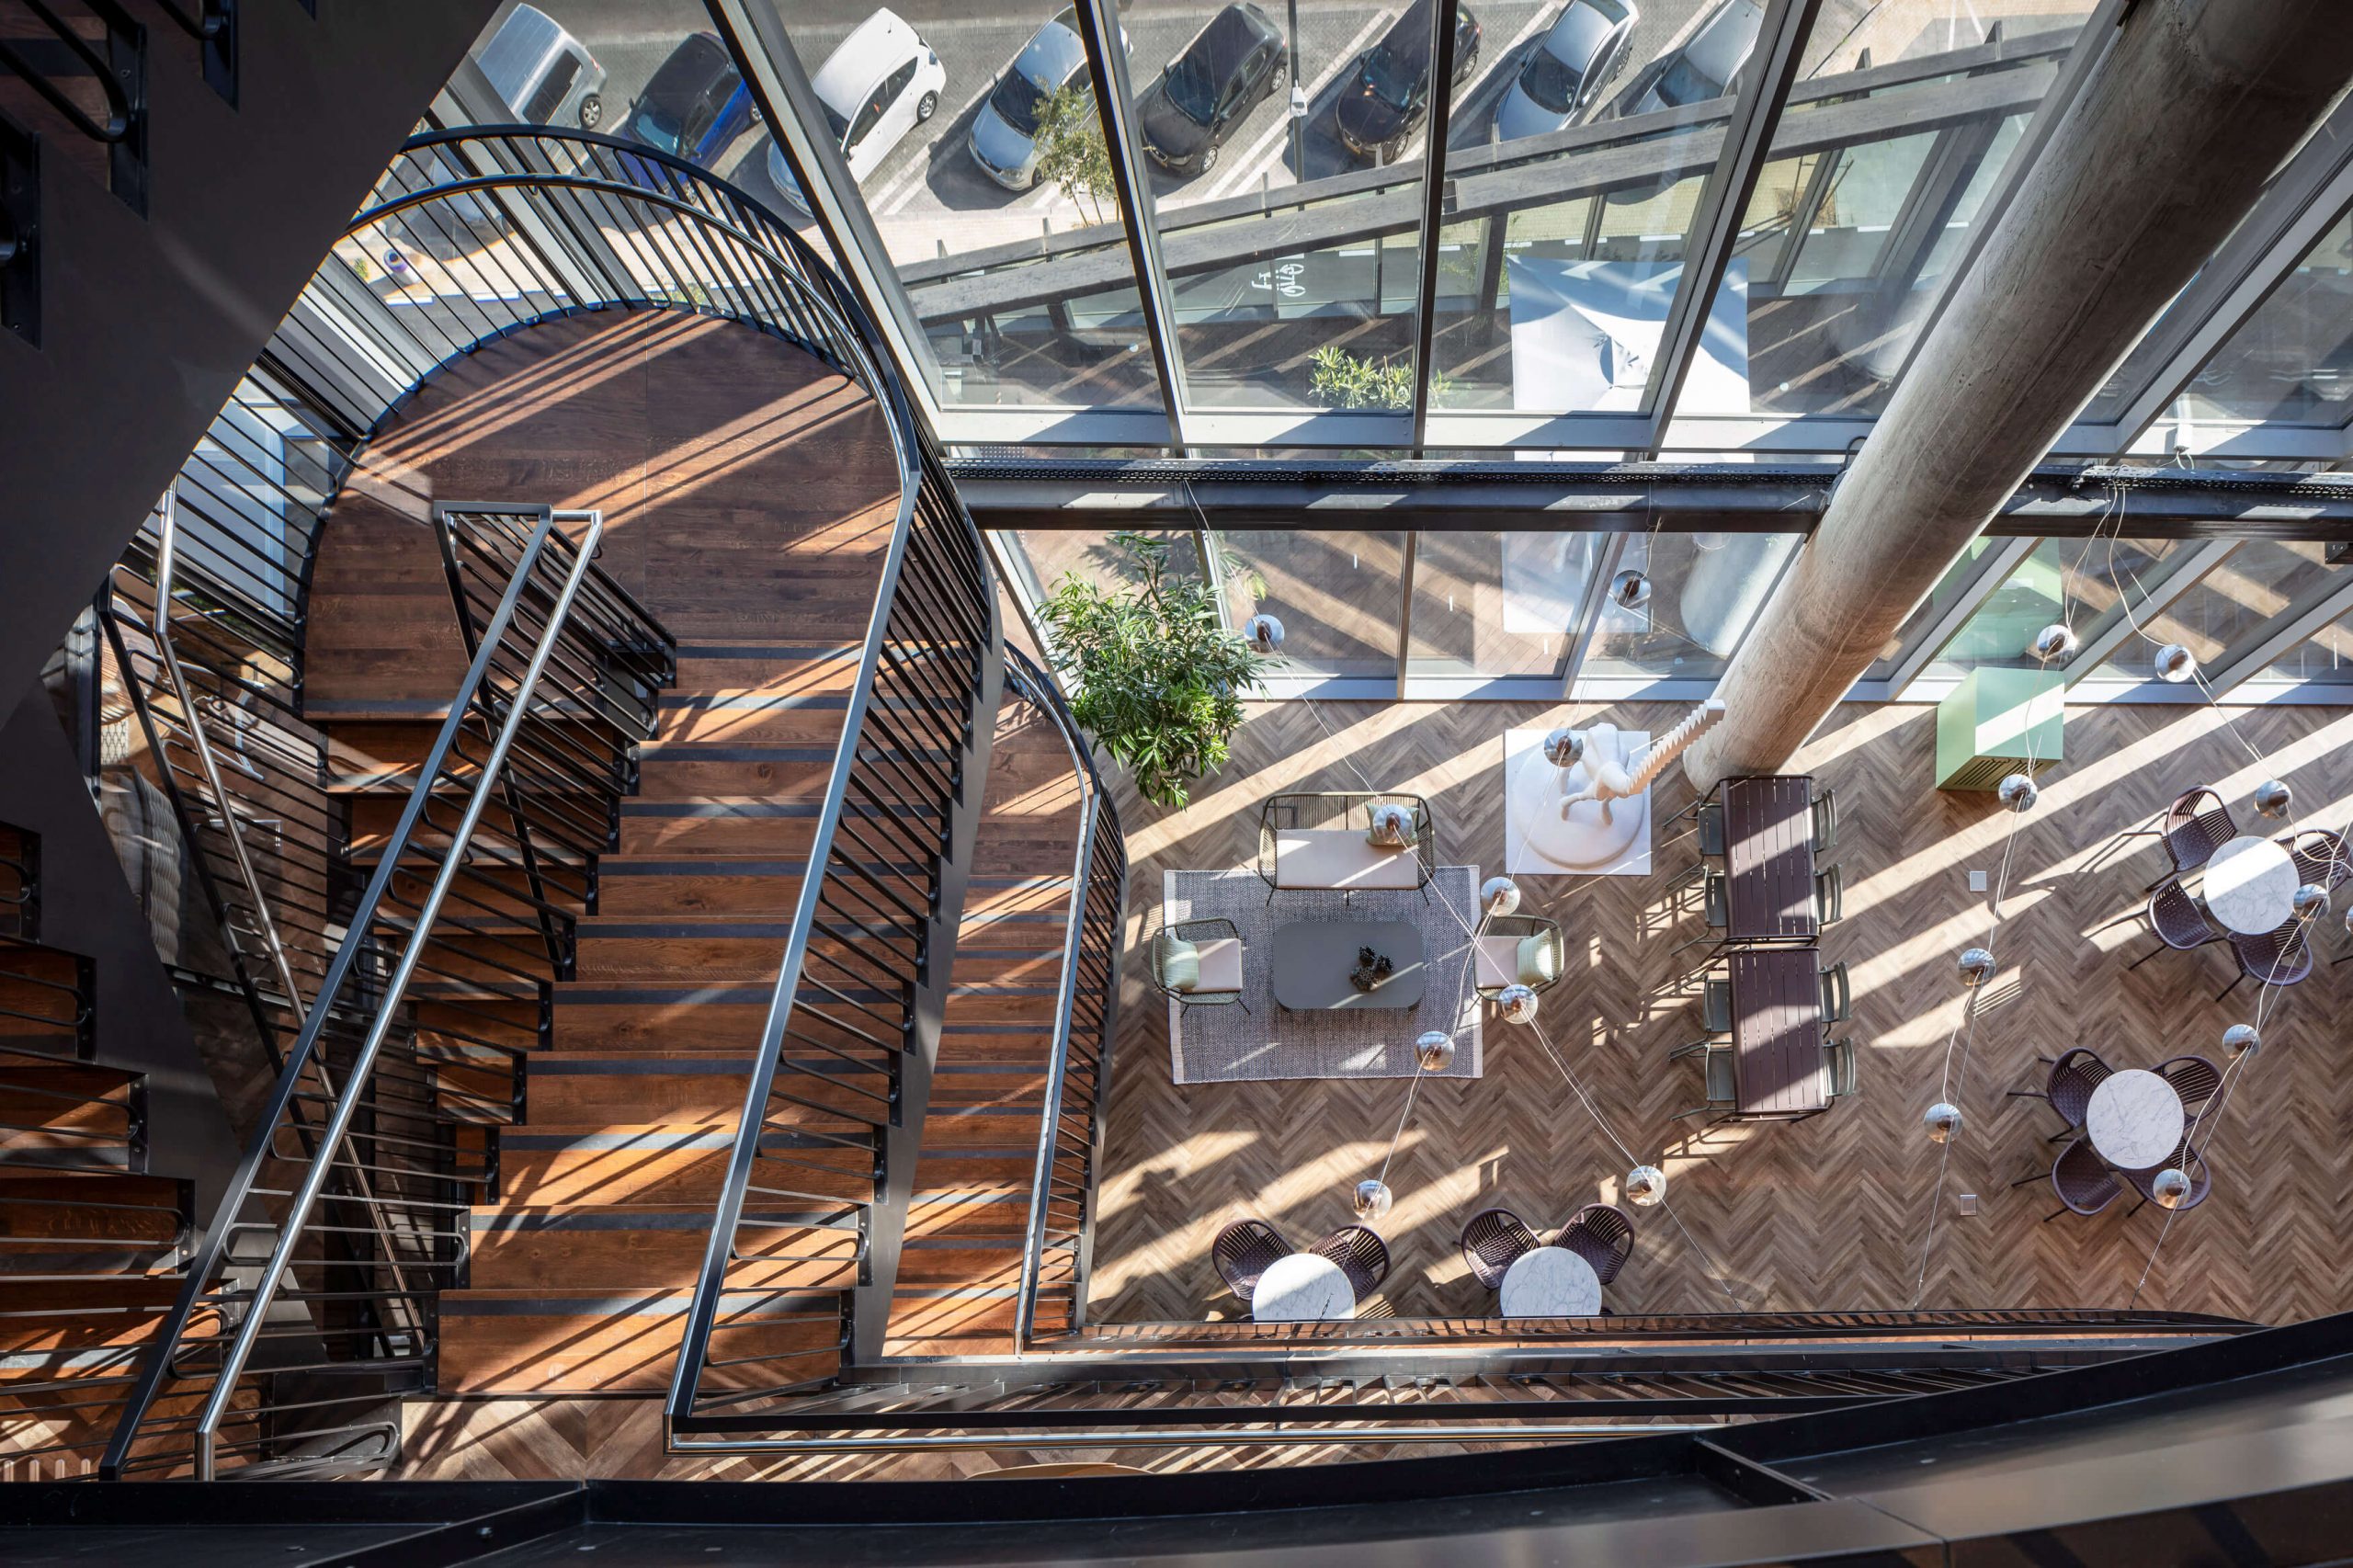 Birds-eye view of Microsoft Israel common area overlooking stairs